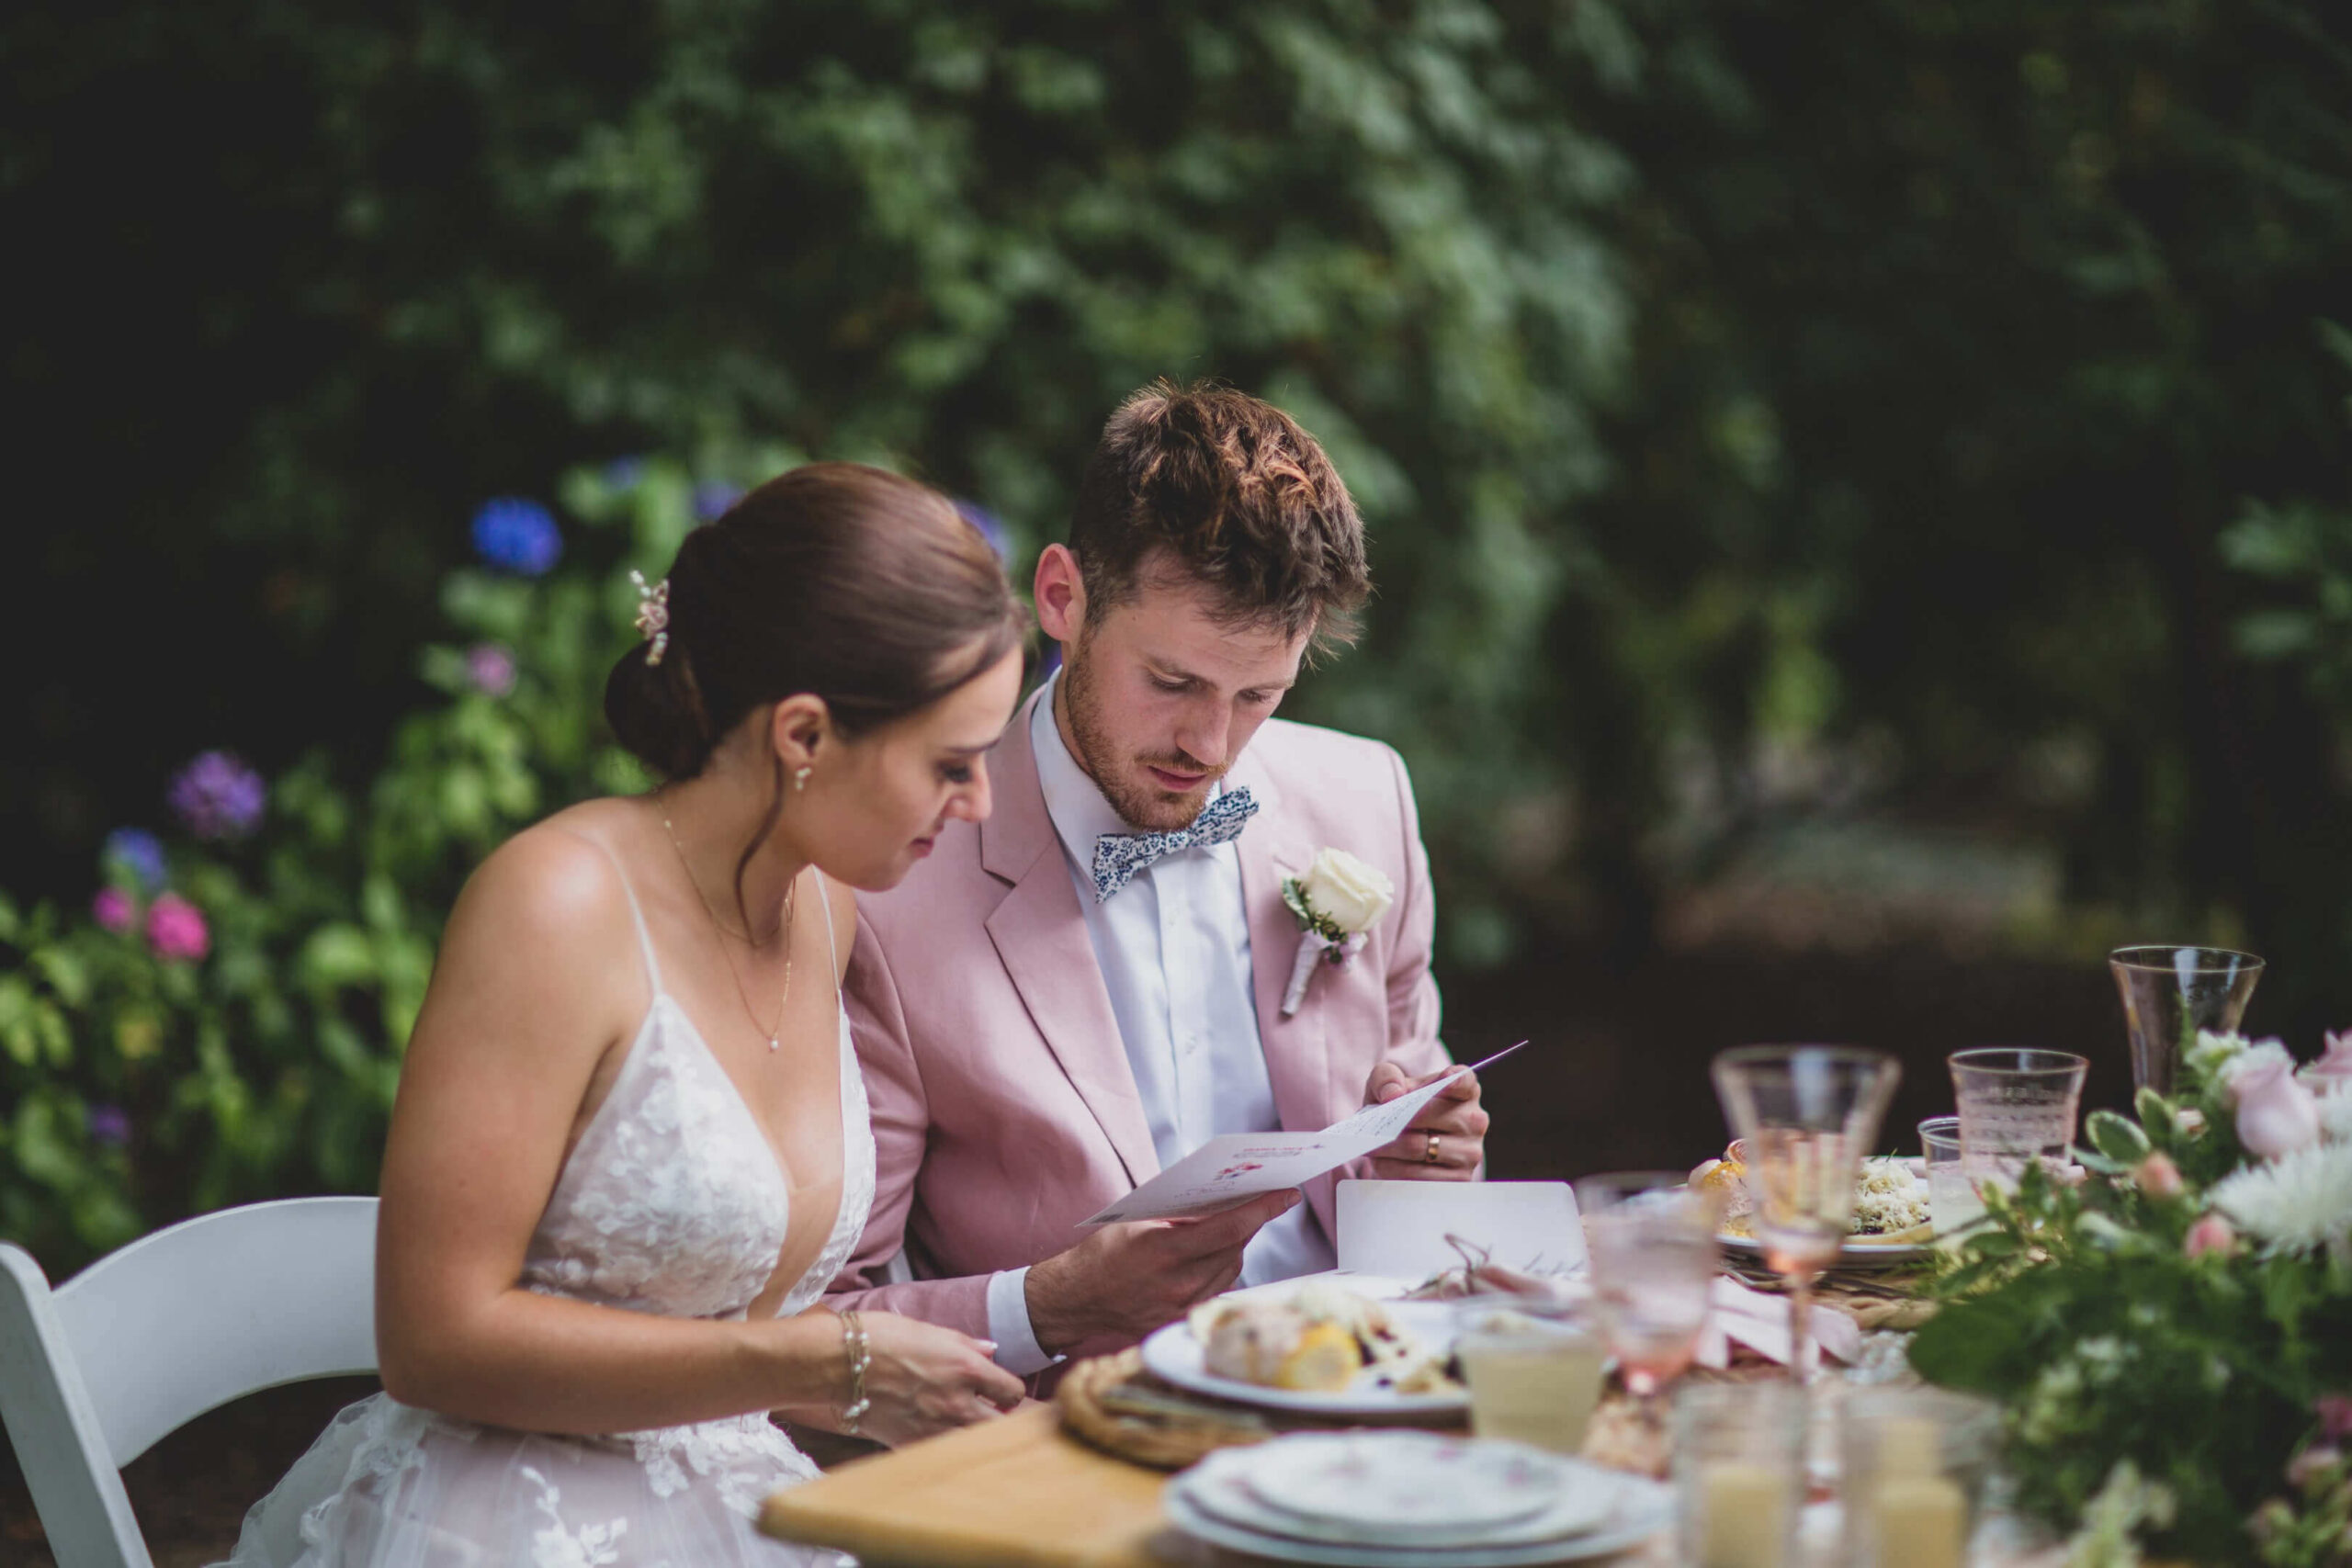 A bride and groom looking at their menu card at their sweetheart table. The table decor is a blush pink colour scheme with vintage white crockery rentals.